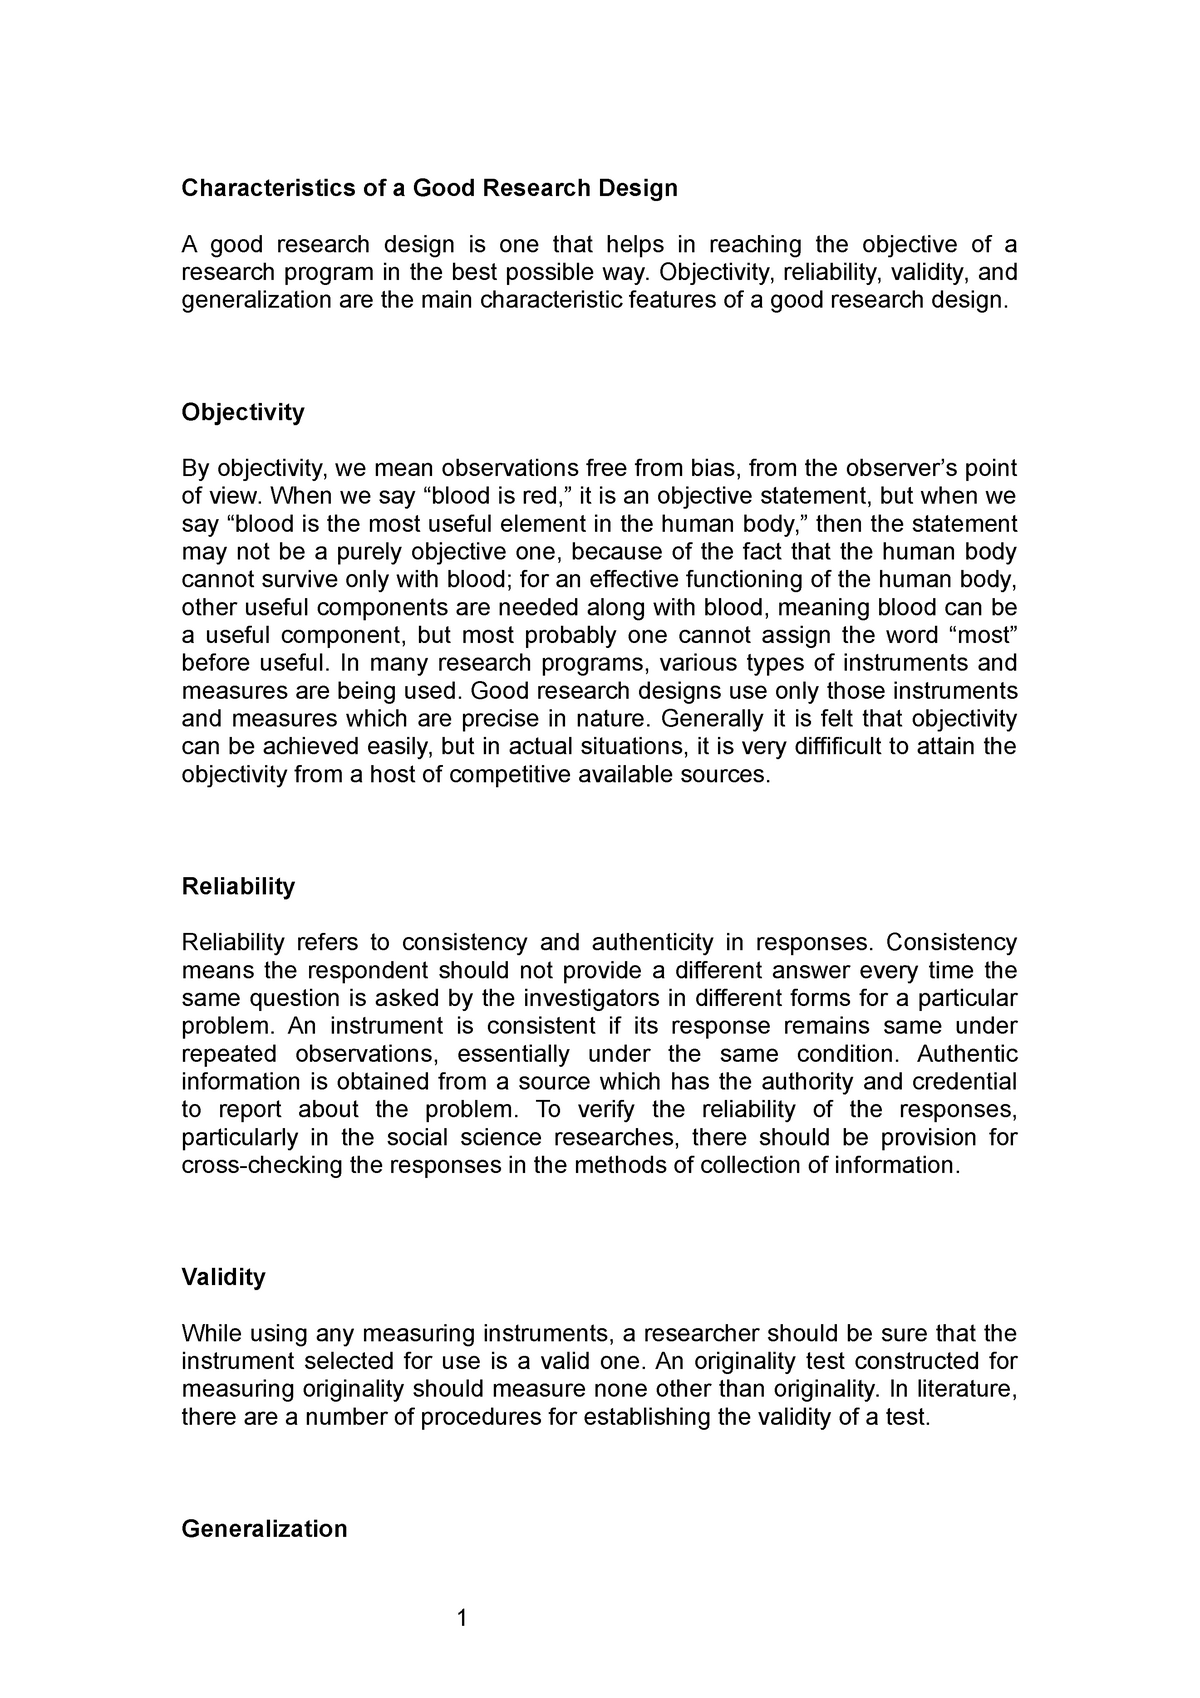 week 4 research proposal project design (sampling reliability validity)